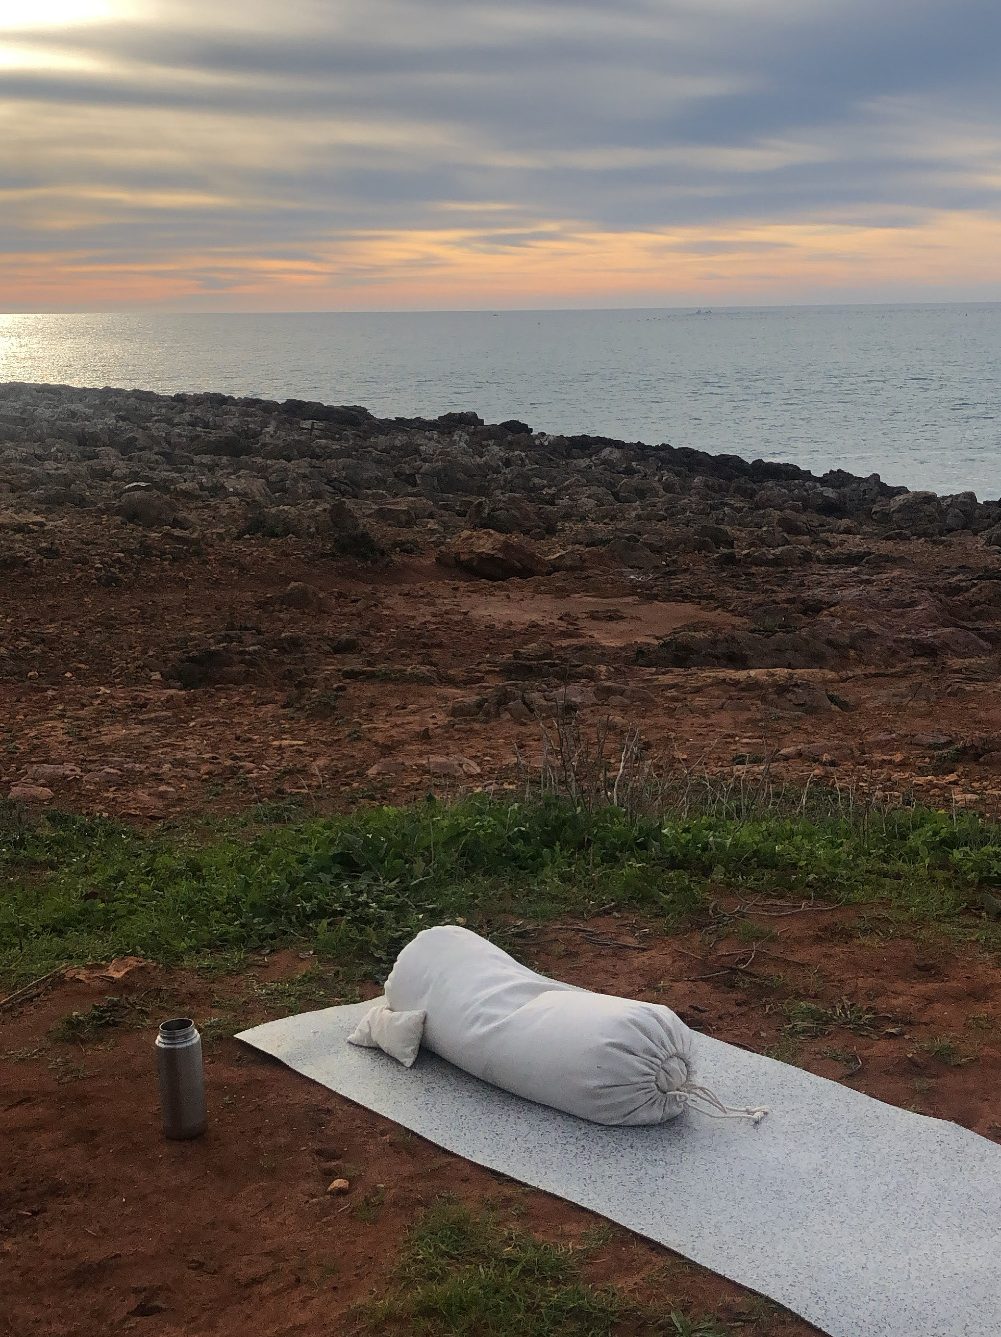 Incredible views during an outdoor yoga class, one of the reasons we love yoga when we travel